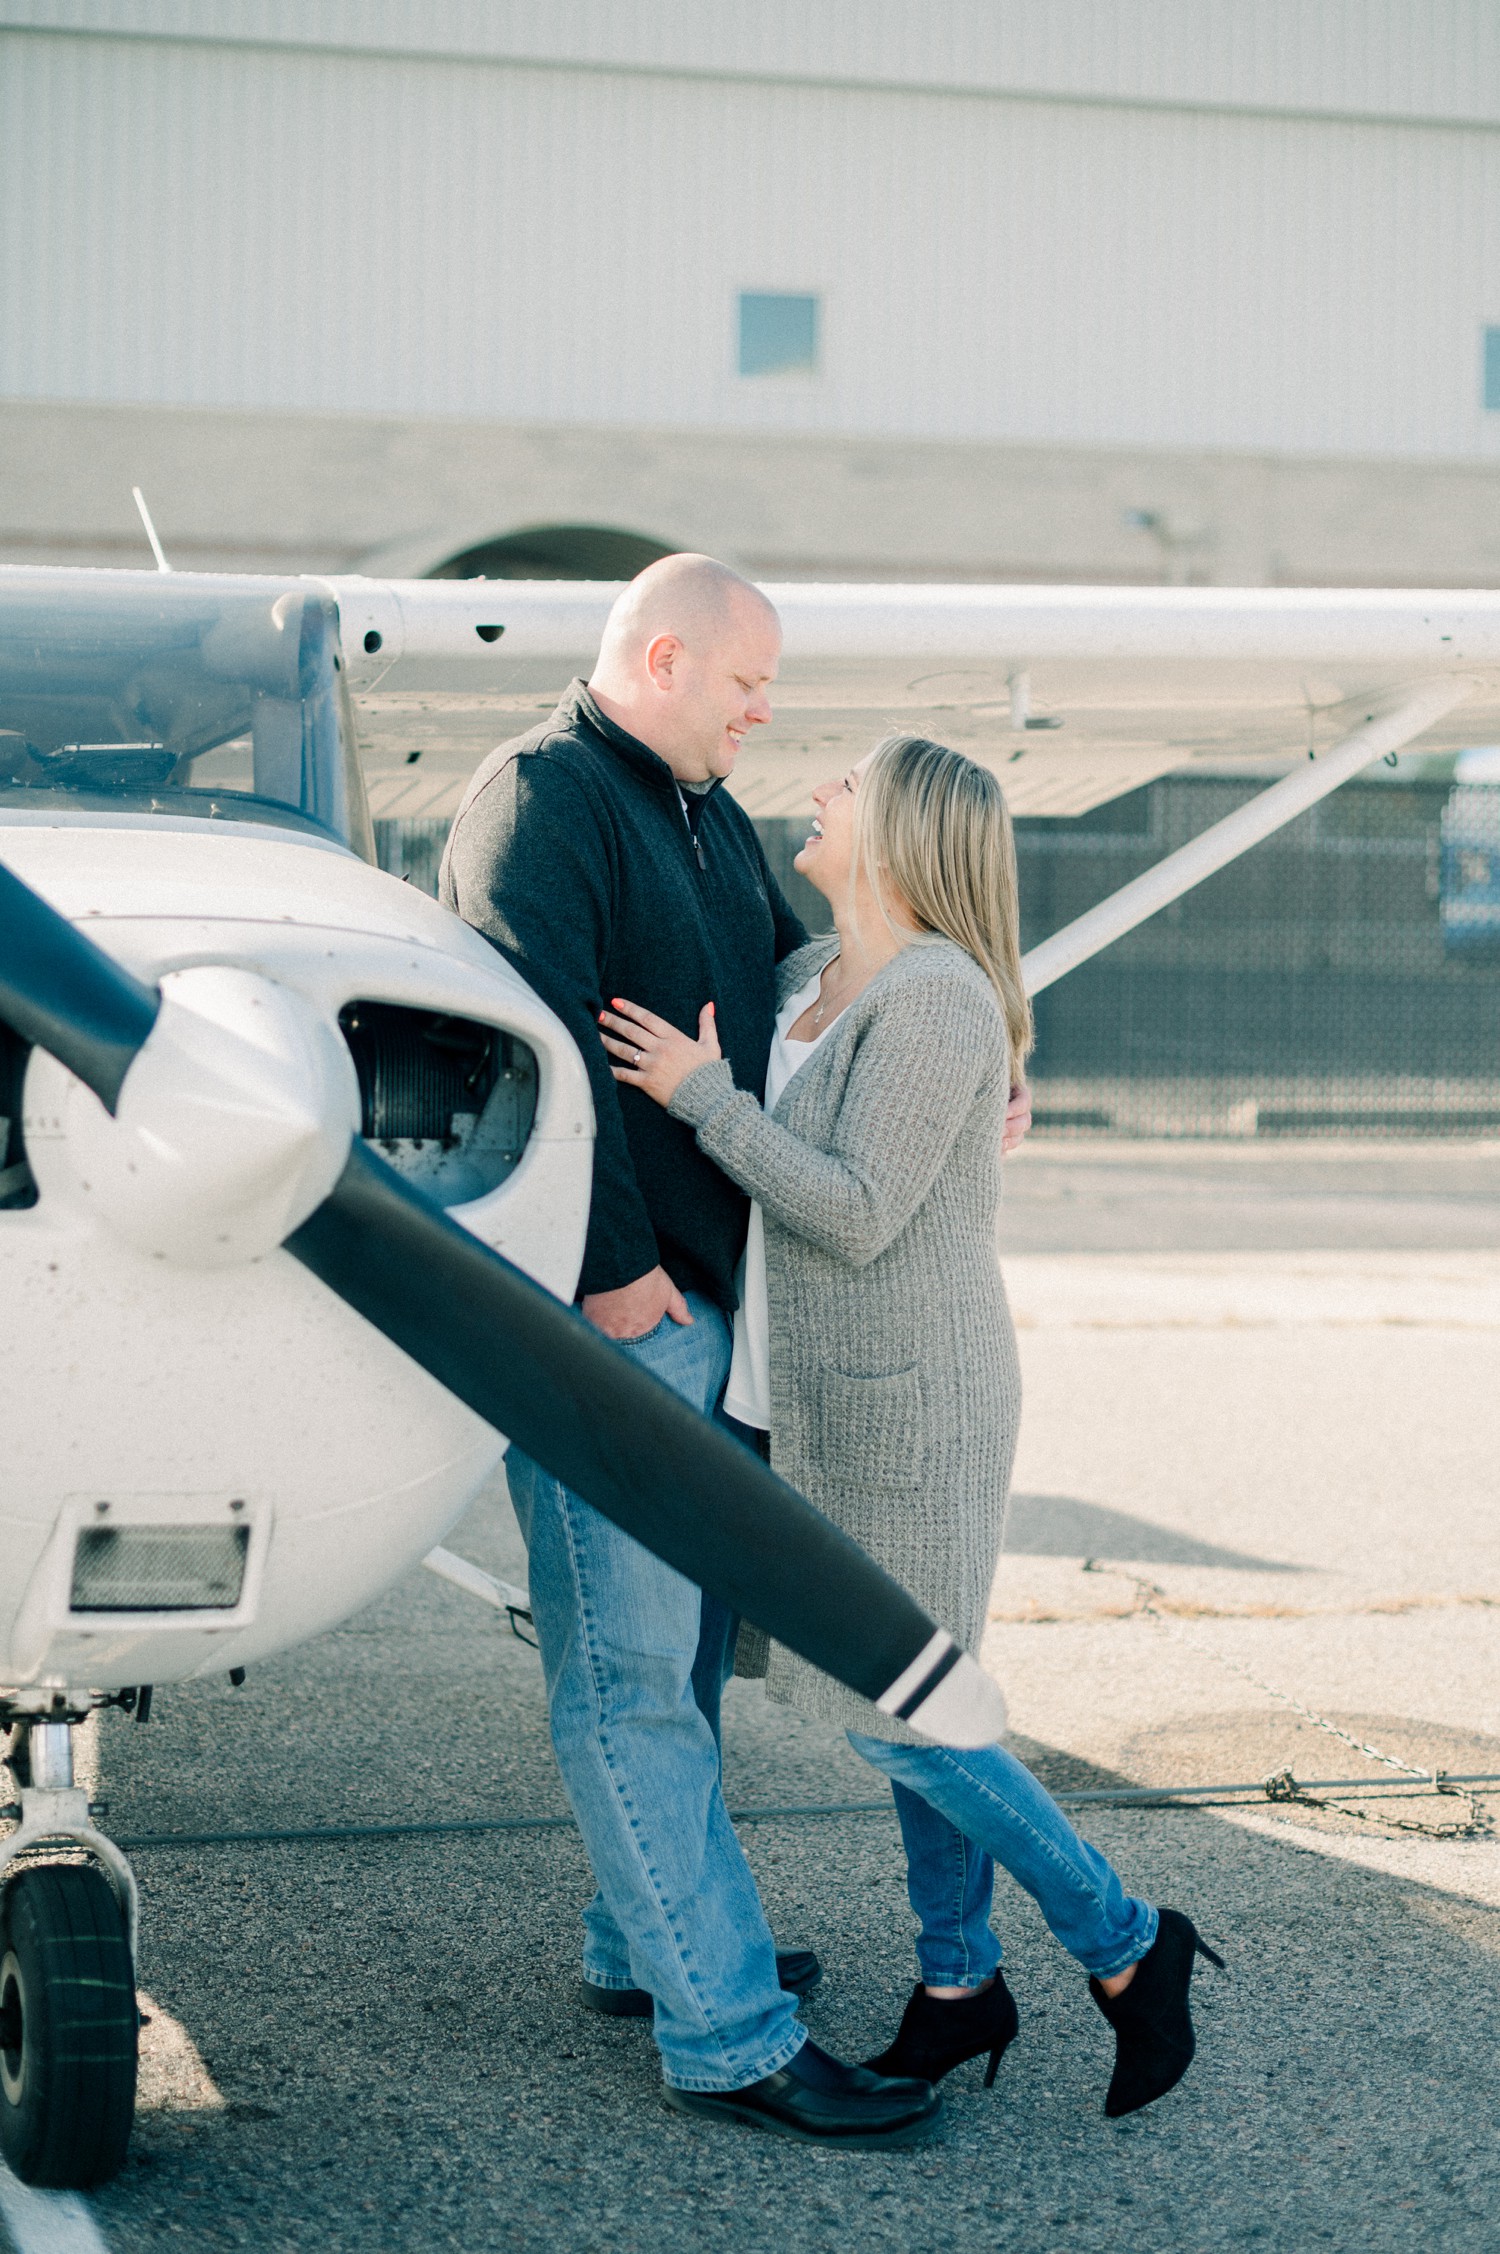 Engagement photos in front of airplane in Denver.